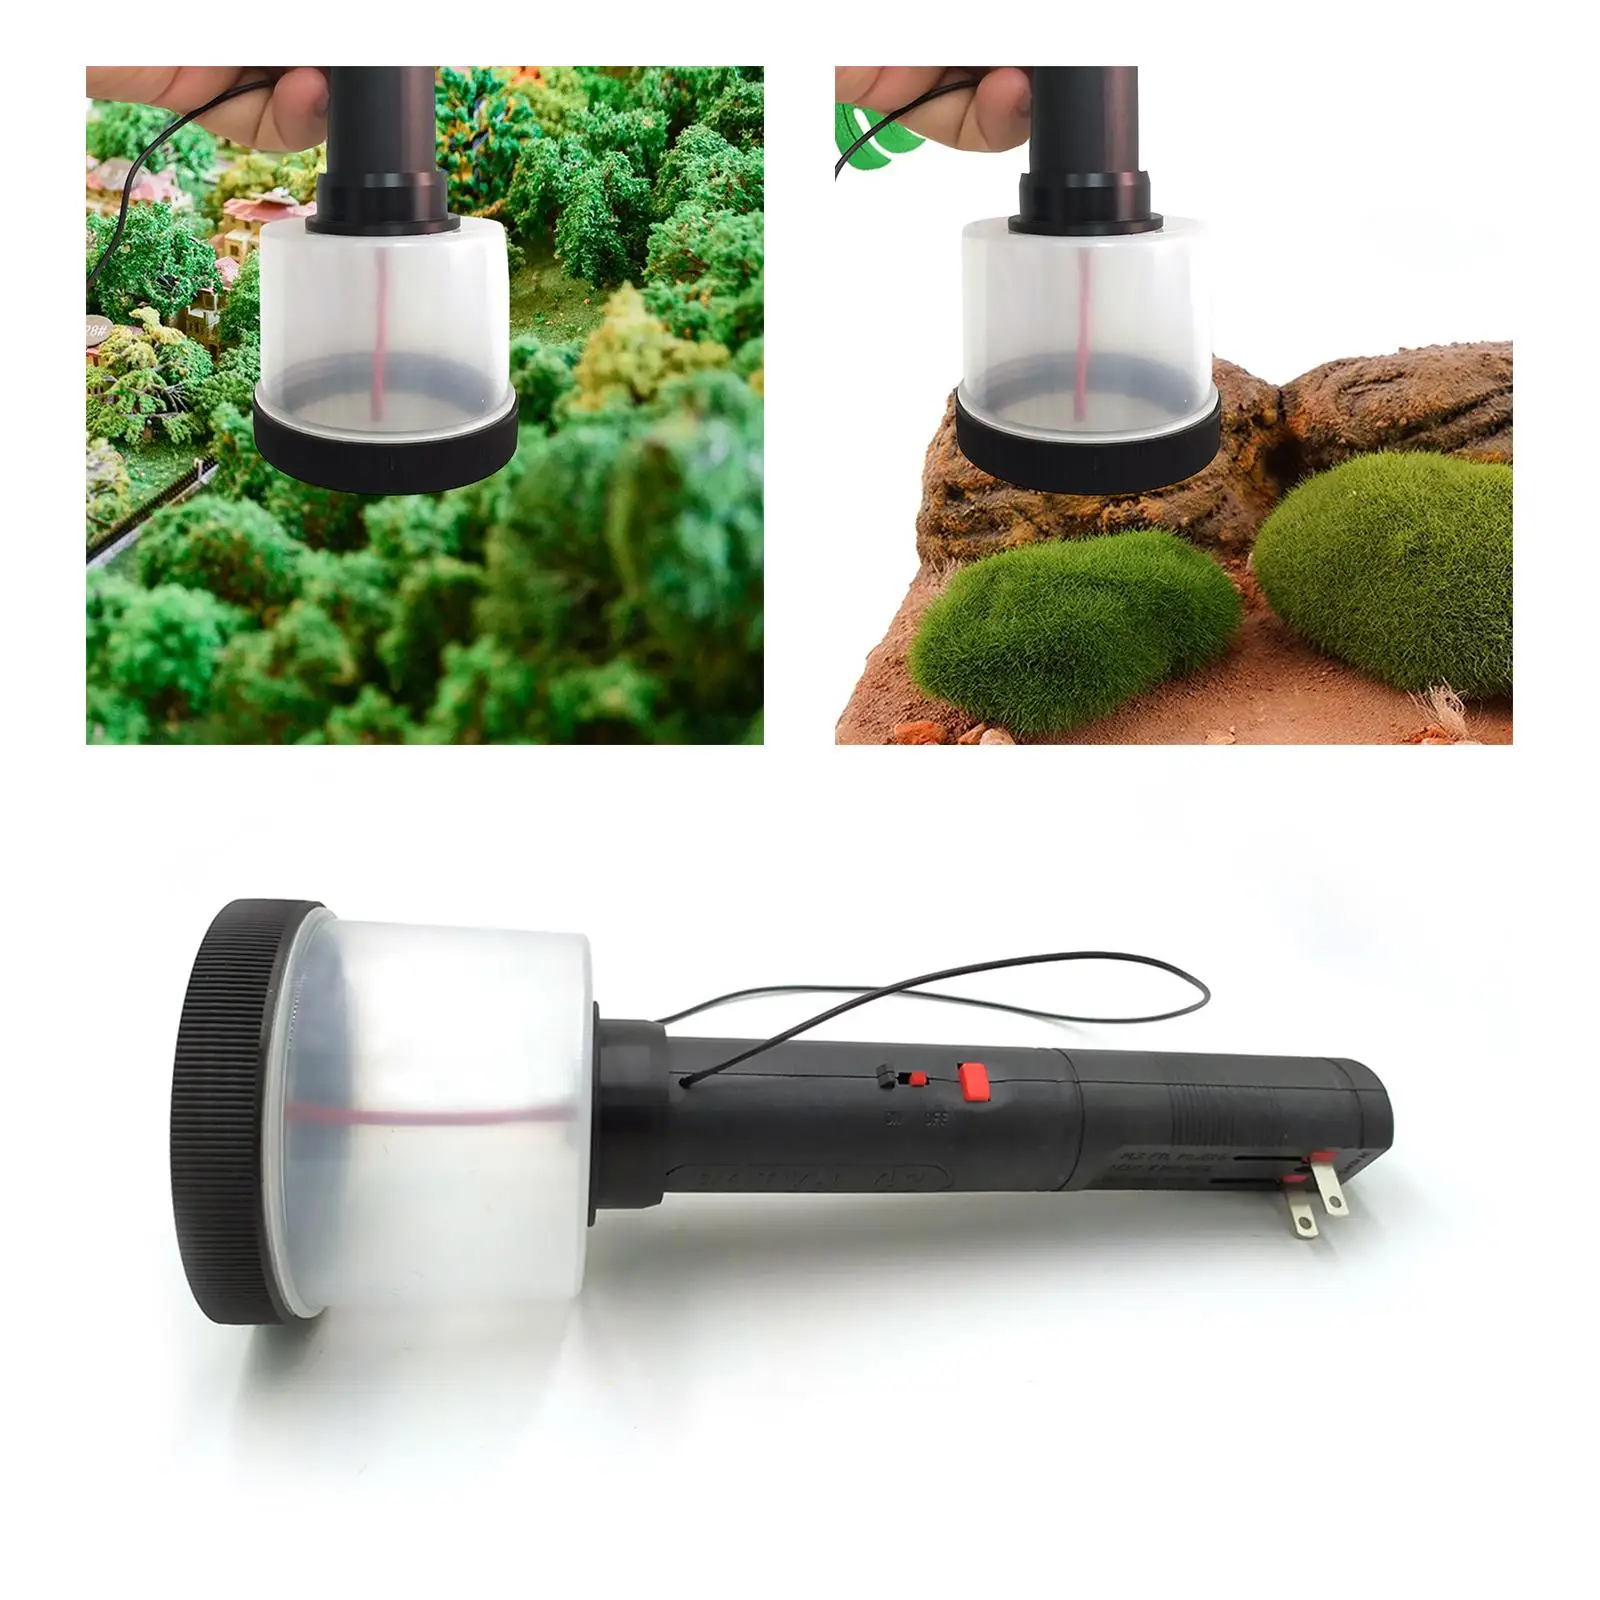 Portable Static Grass Applicator Hobby Accessories Decoration Supplies Practical Electrostatic Flocking Machine for DIY Project